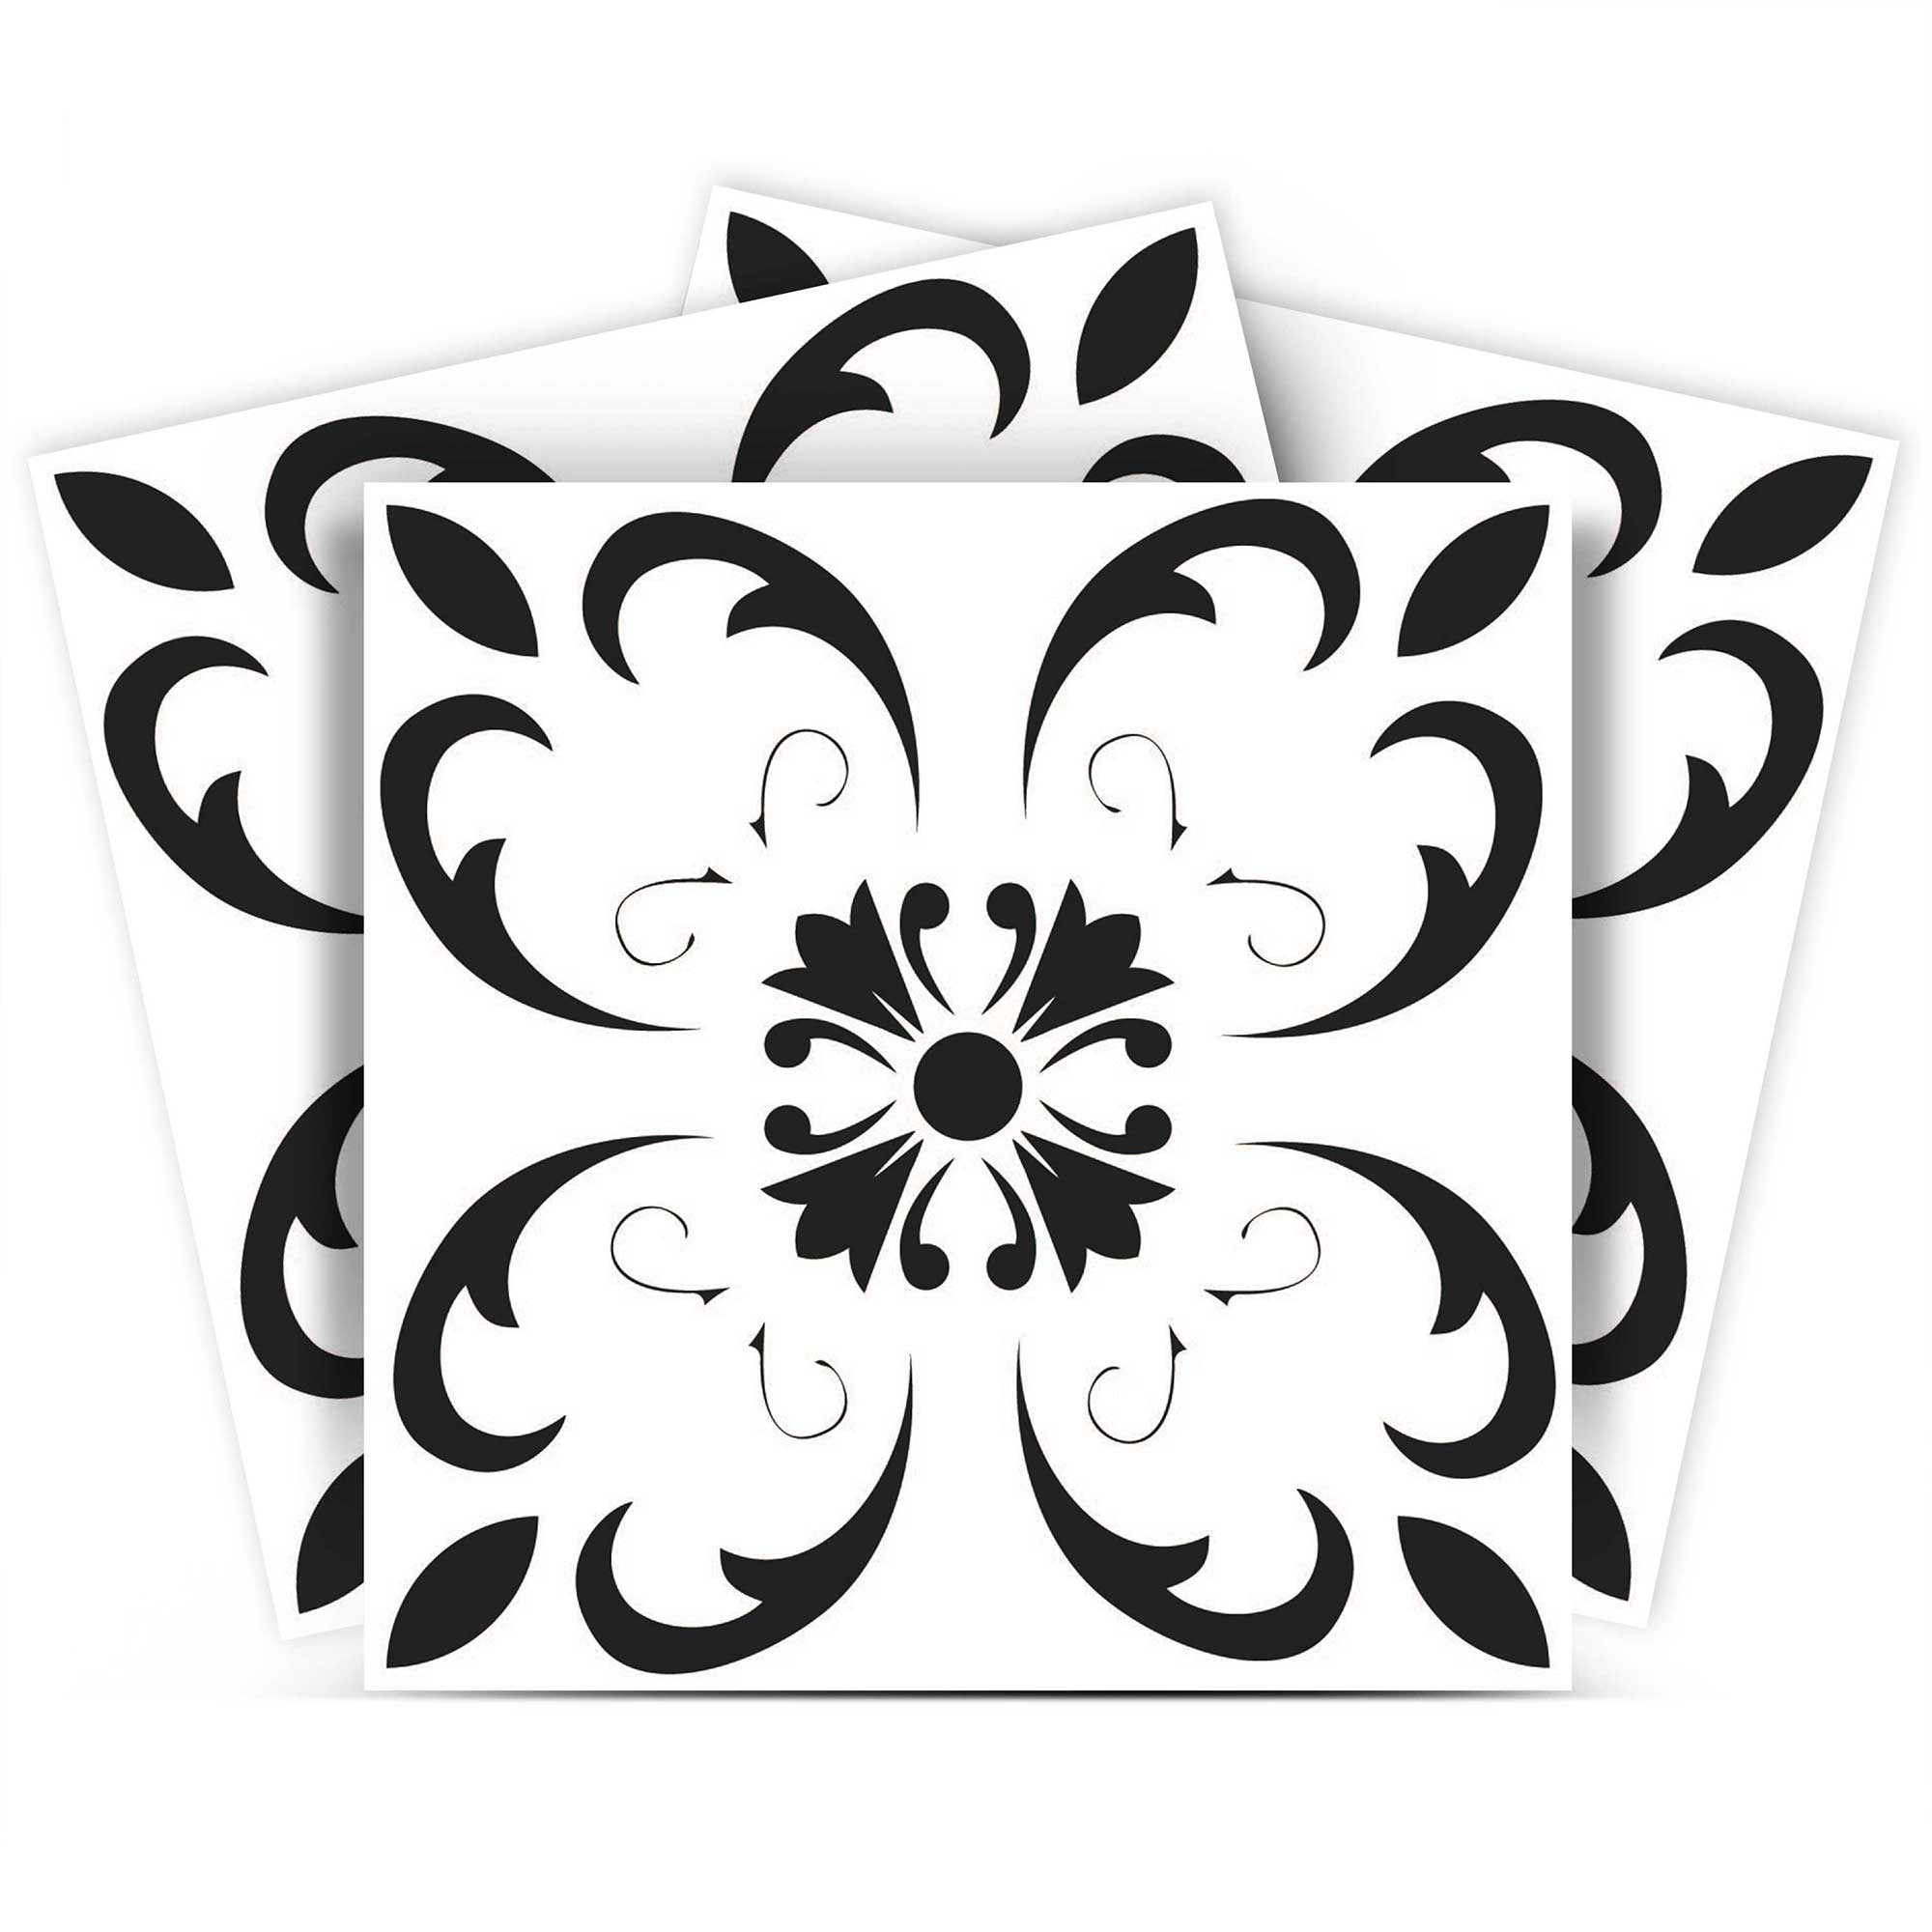 5" X 5" Black and White Delia Peel and Stick Removable Tiles-399891-1